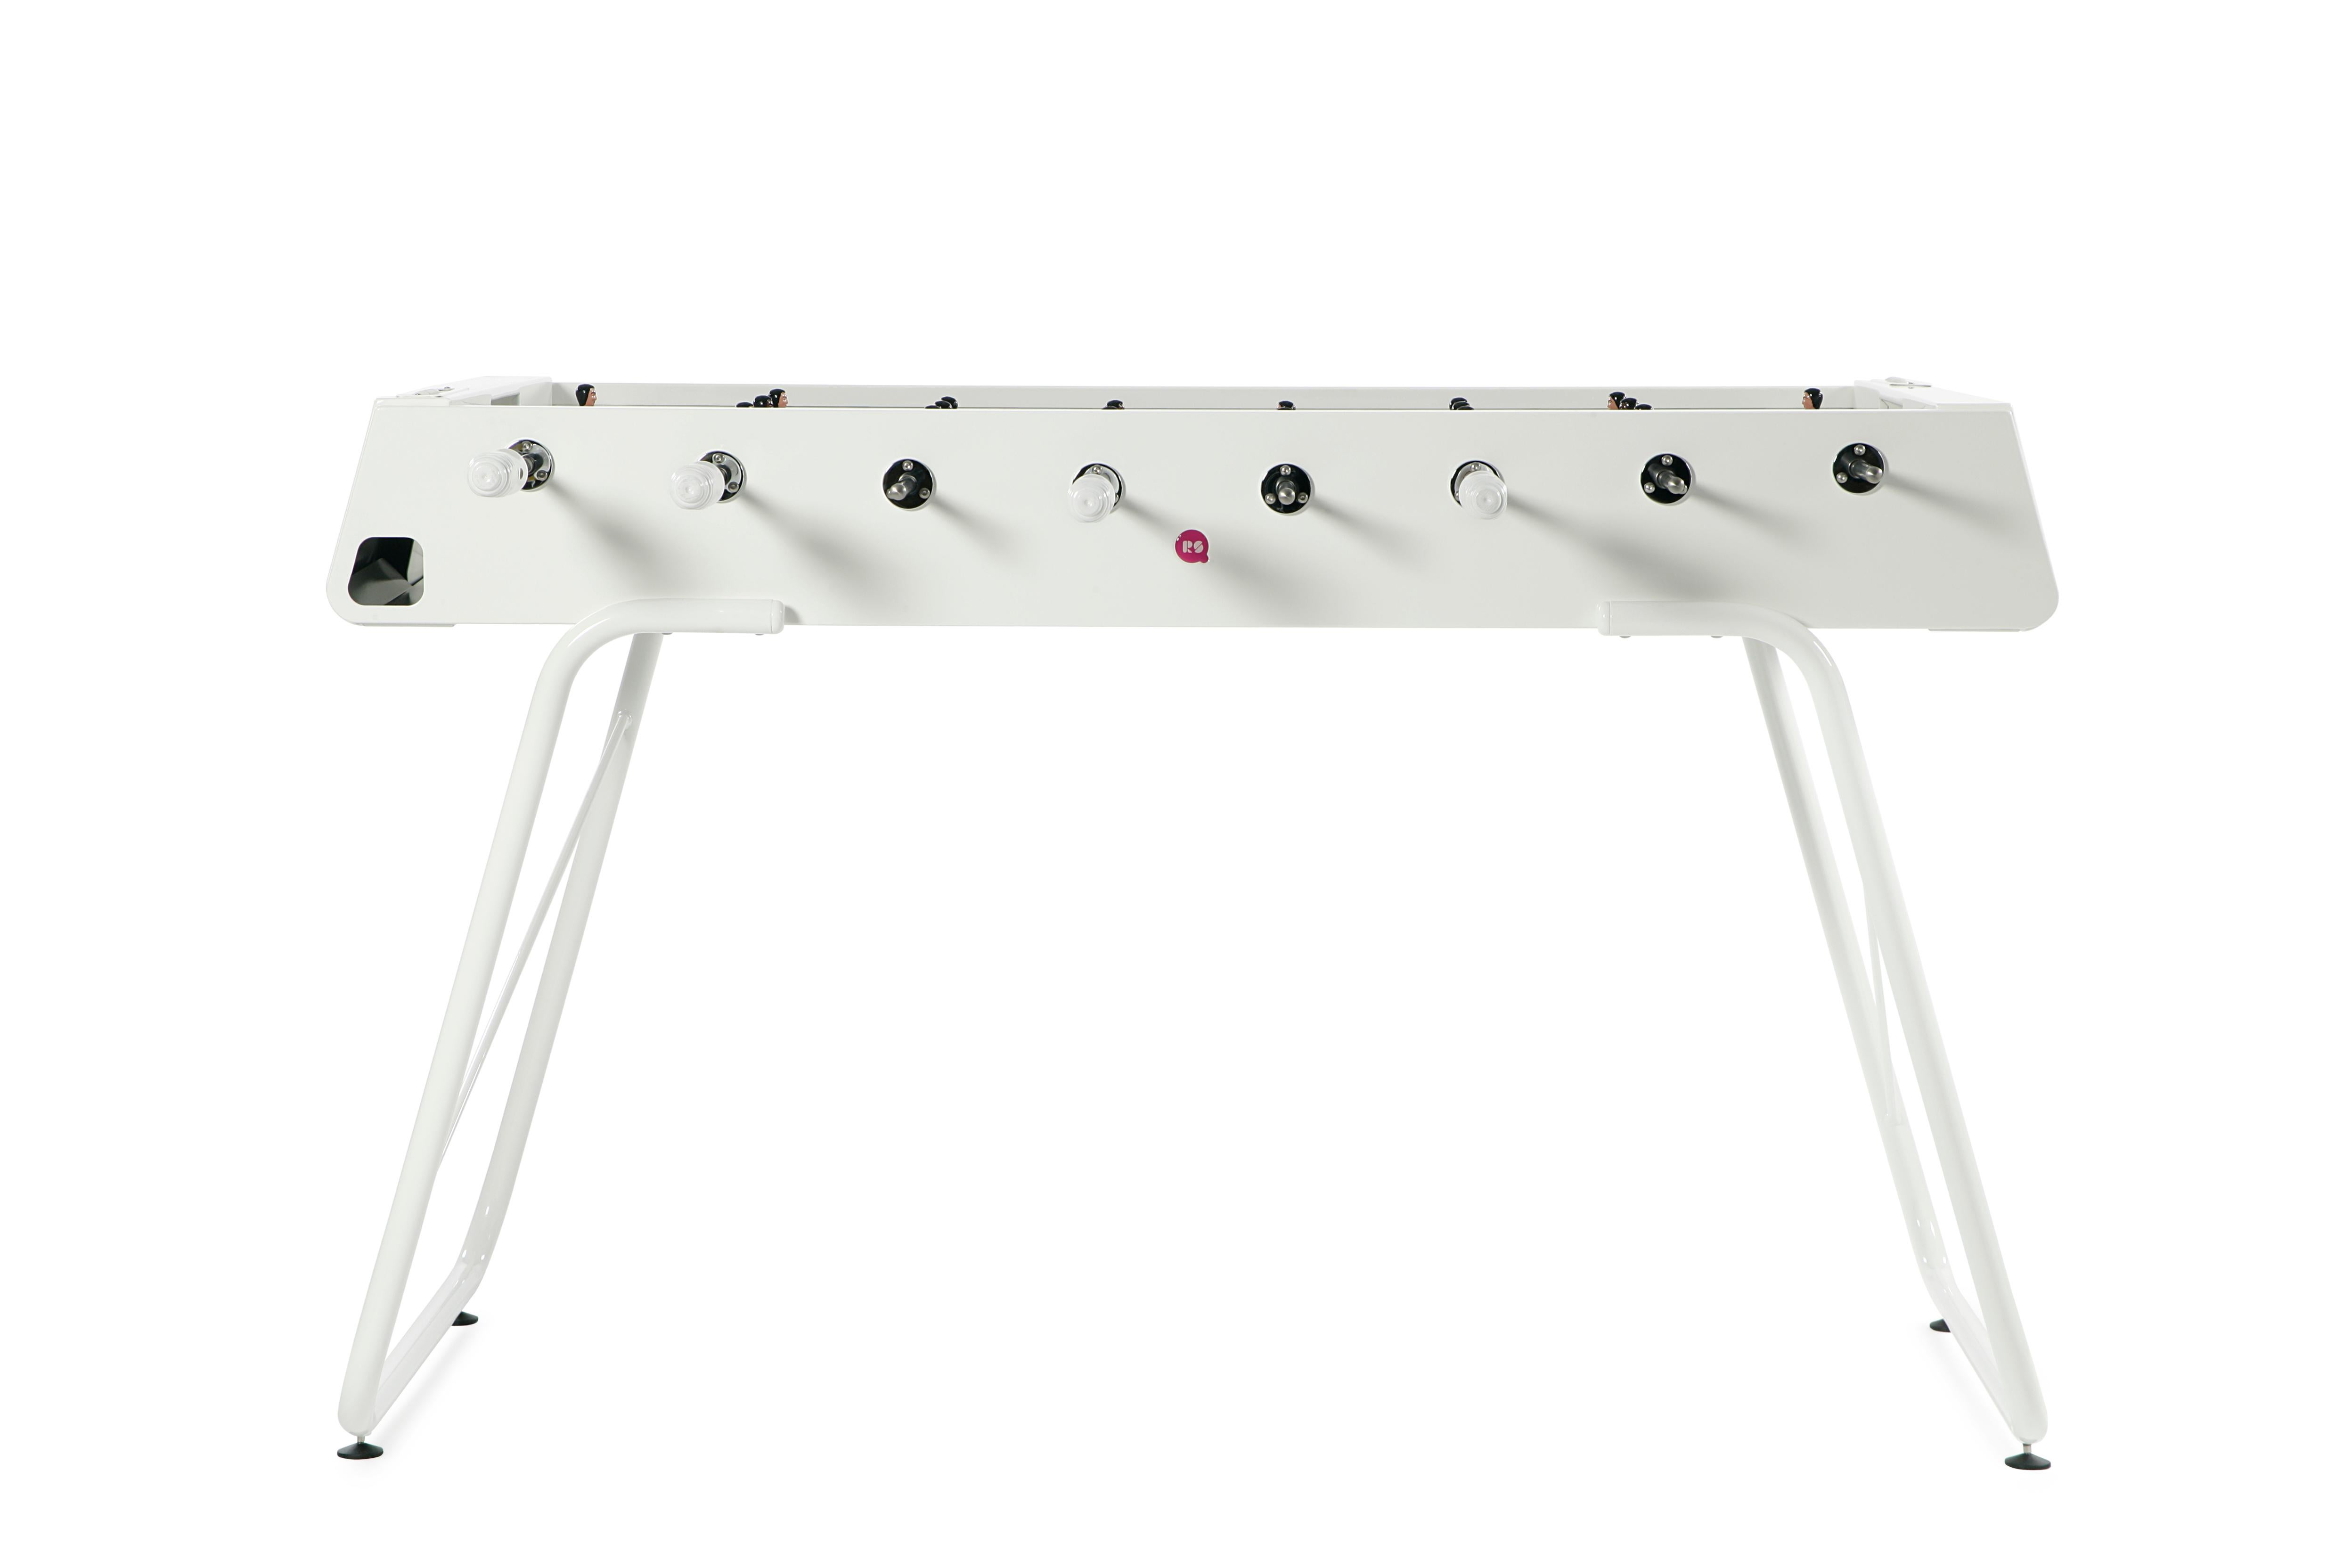 The R3 is a football table for everyone. The RS3 lets you enjoy the same game as its bigger cousin, the RS2, but with new features. The same model is made for both outdoor and indoor use. Its new lines and legs make it lighter but without losing